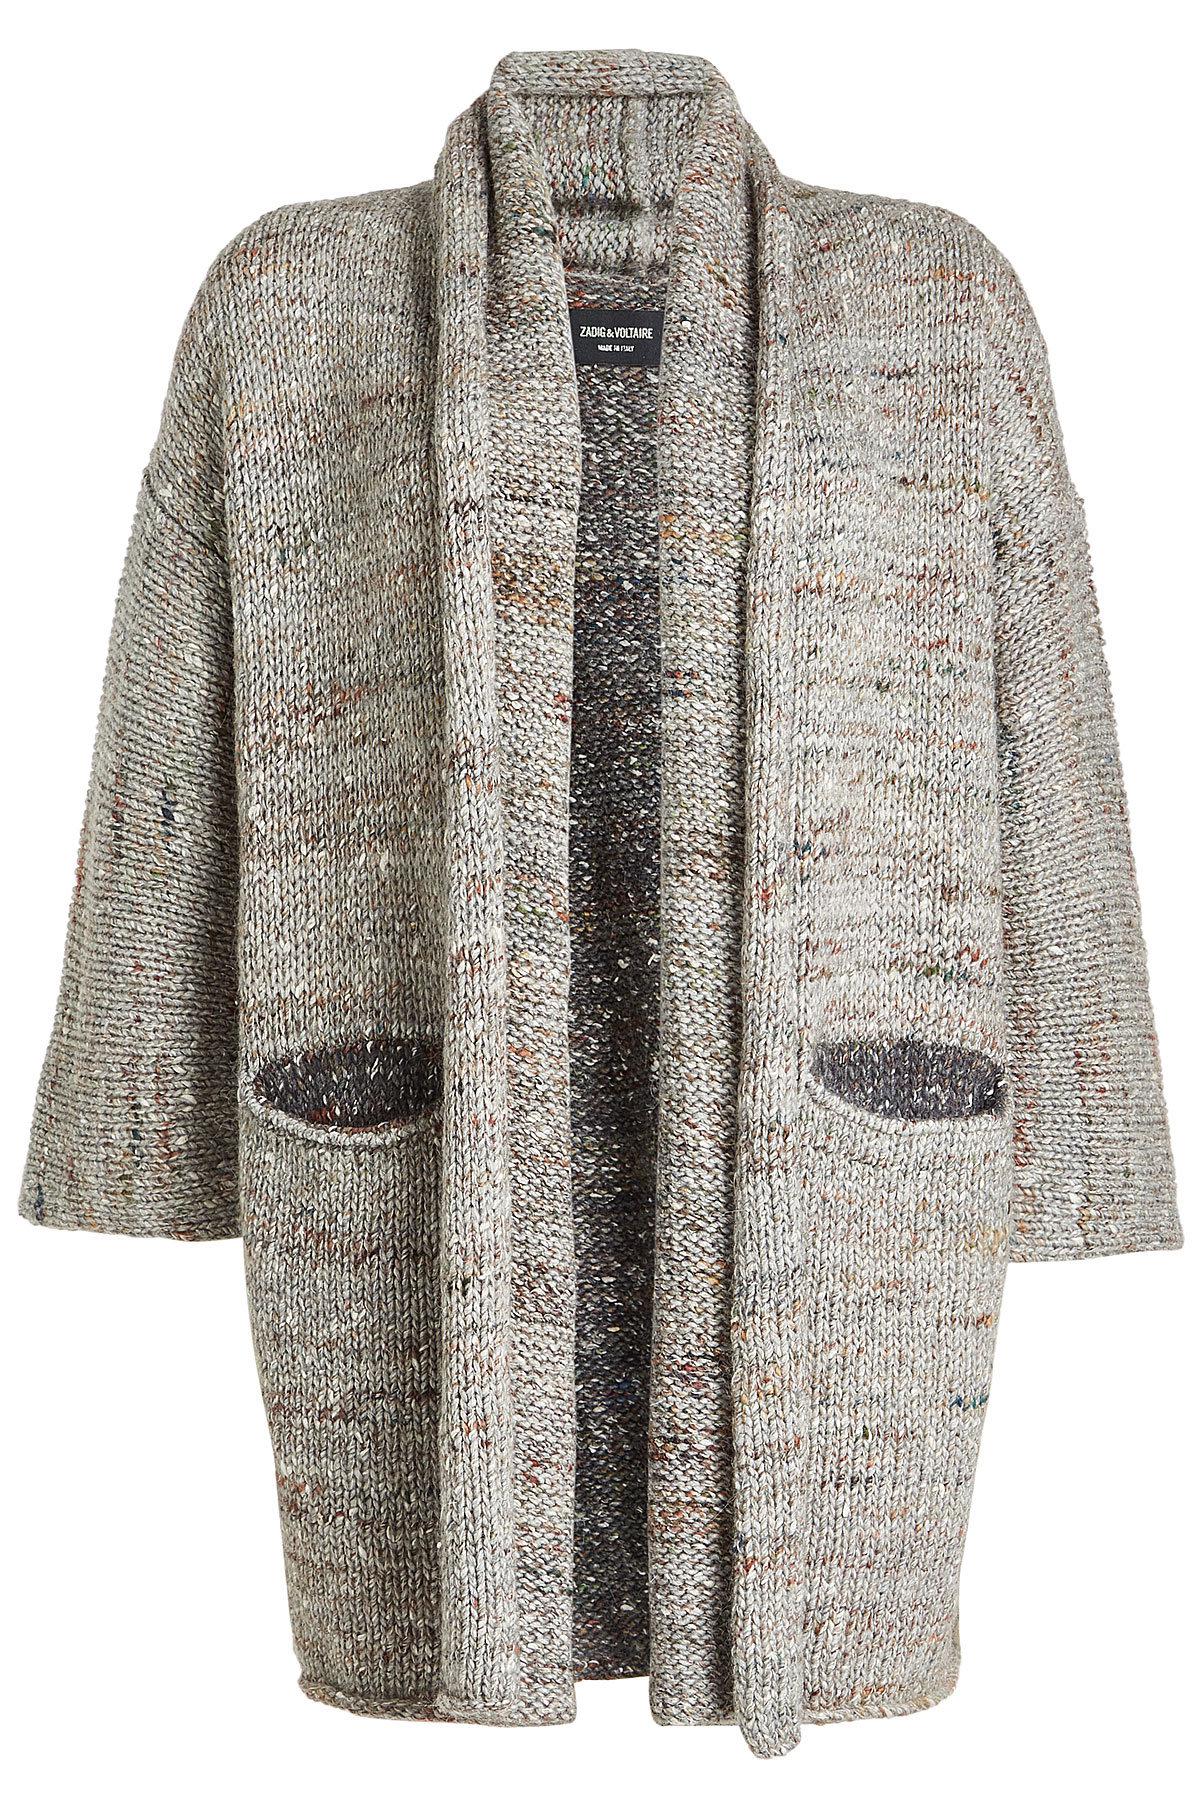 Lyst - Zadig & Voltaire Cardigan With Wool, Alpaca, Silk And Mohair in Gray